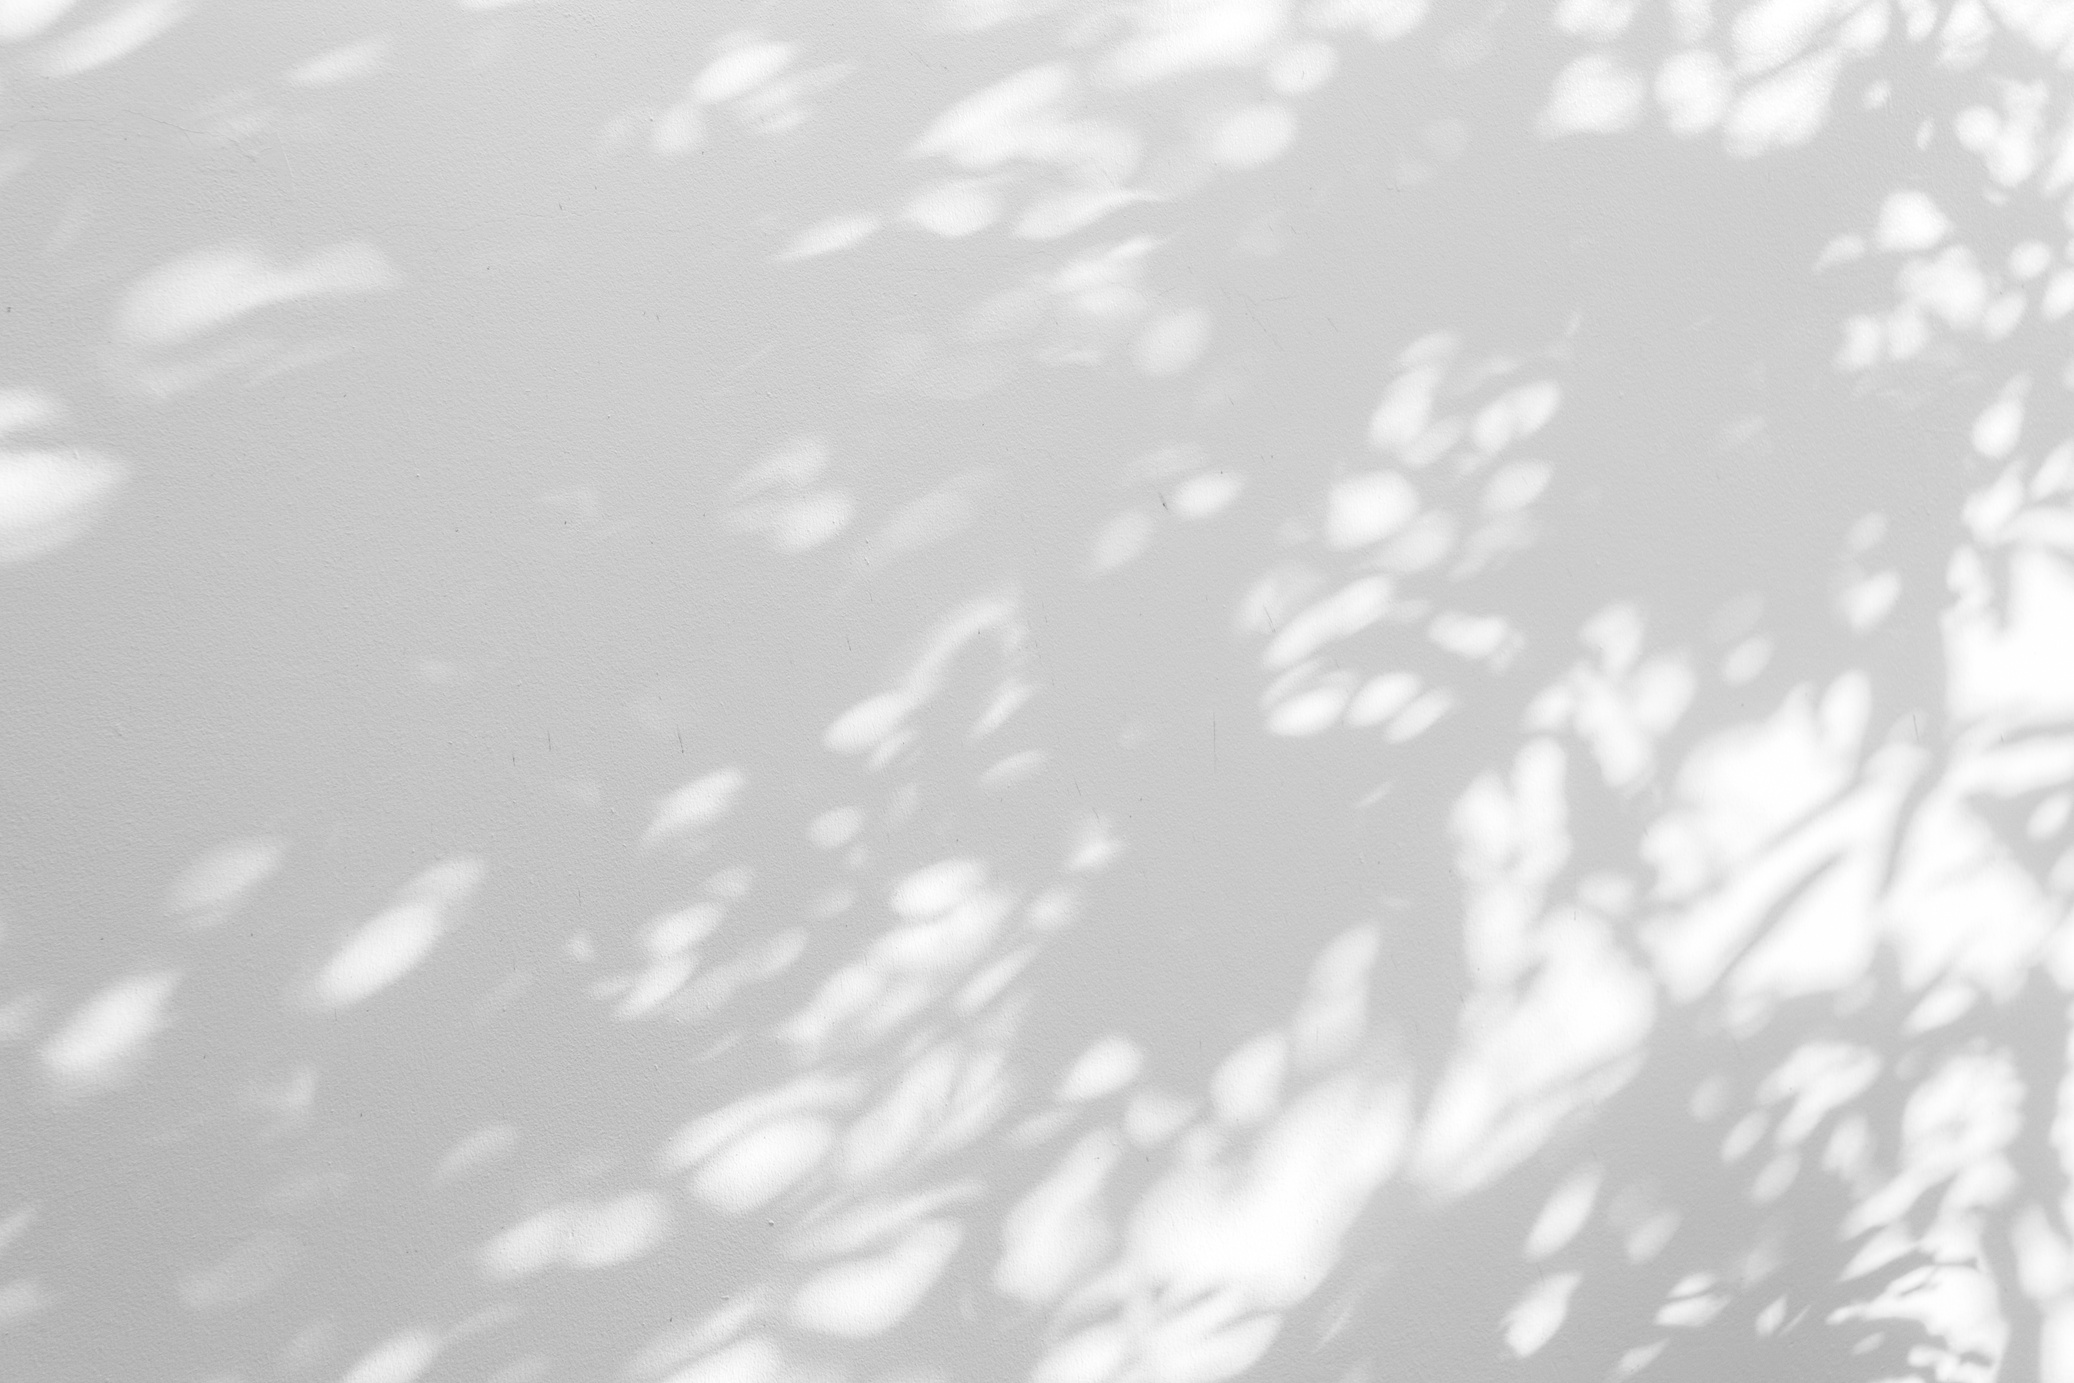 Shadow of Leaves on White Wall